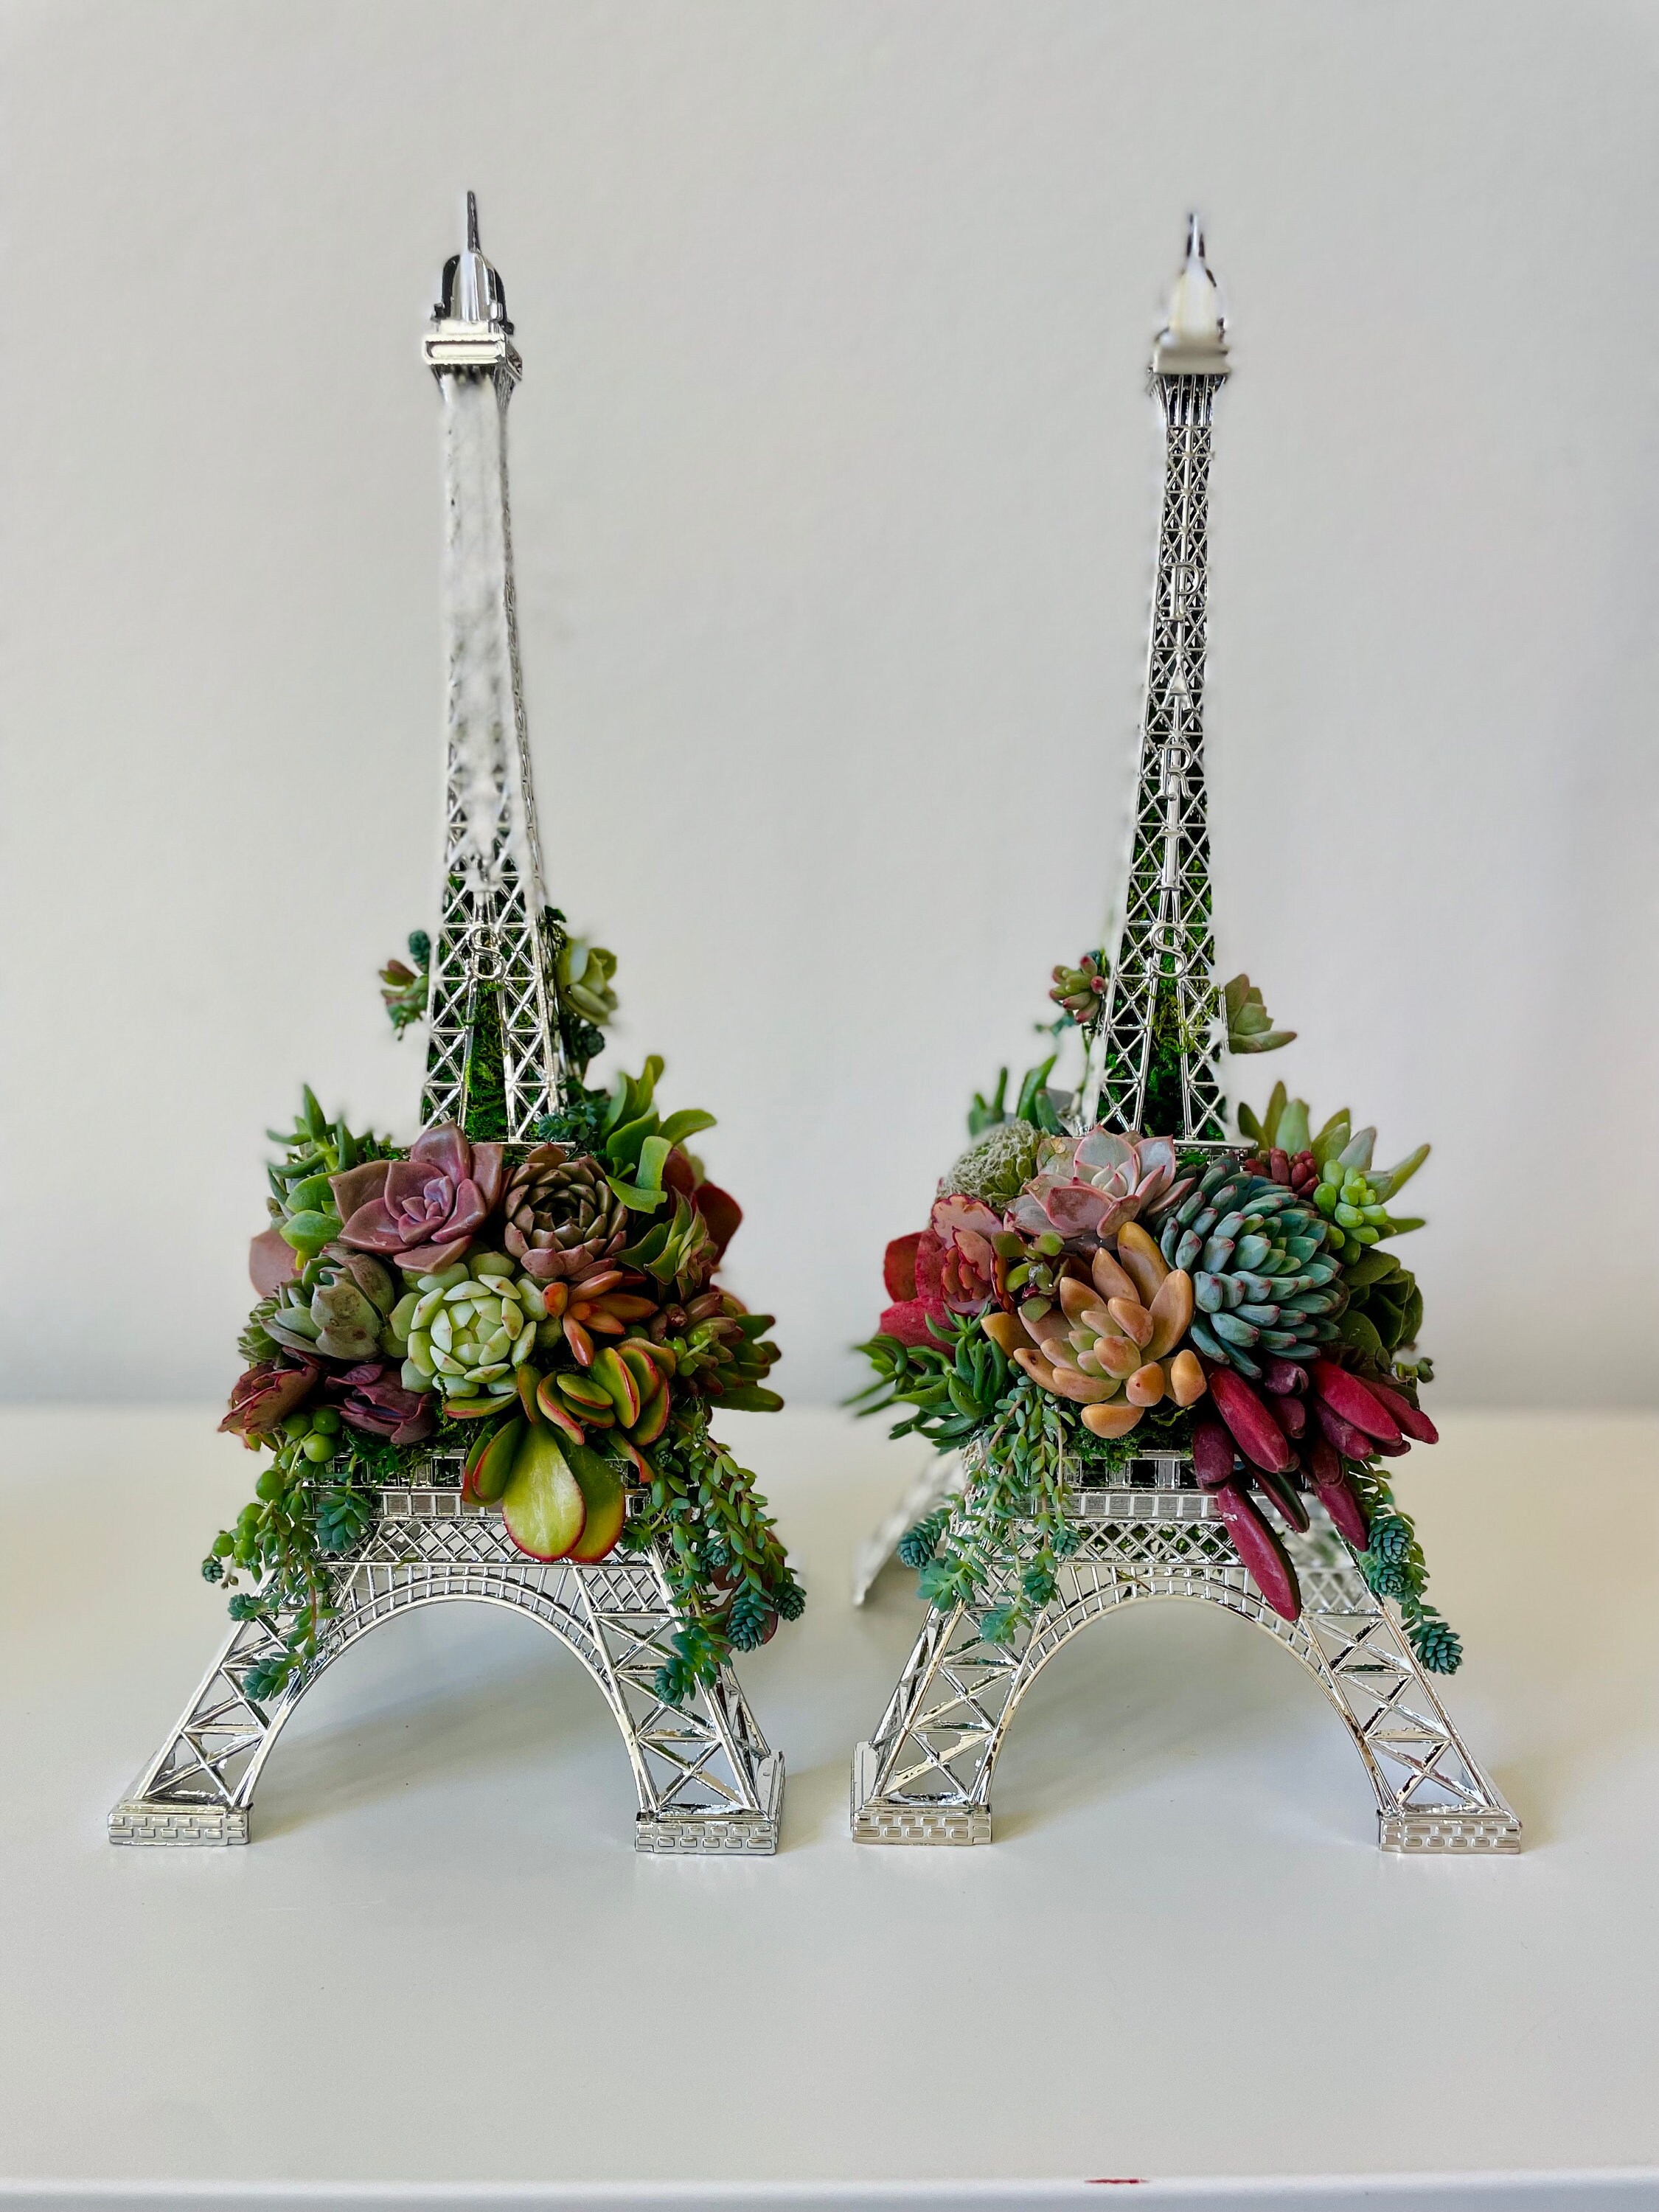 Craft and Party- Metal Eiffel Tower Centerpiece Decoration 7-24